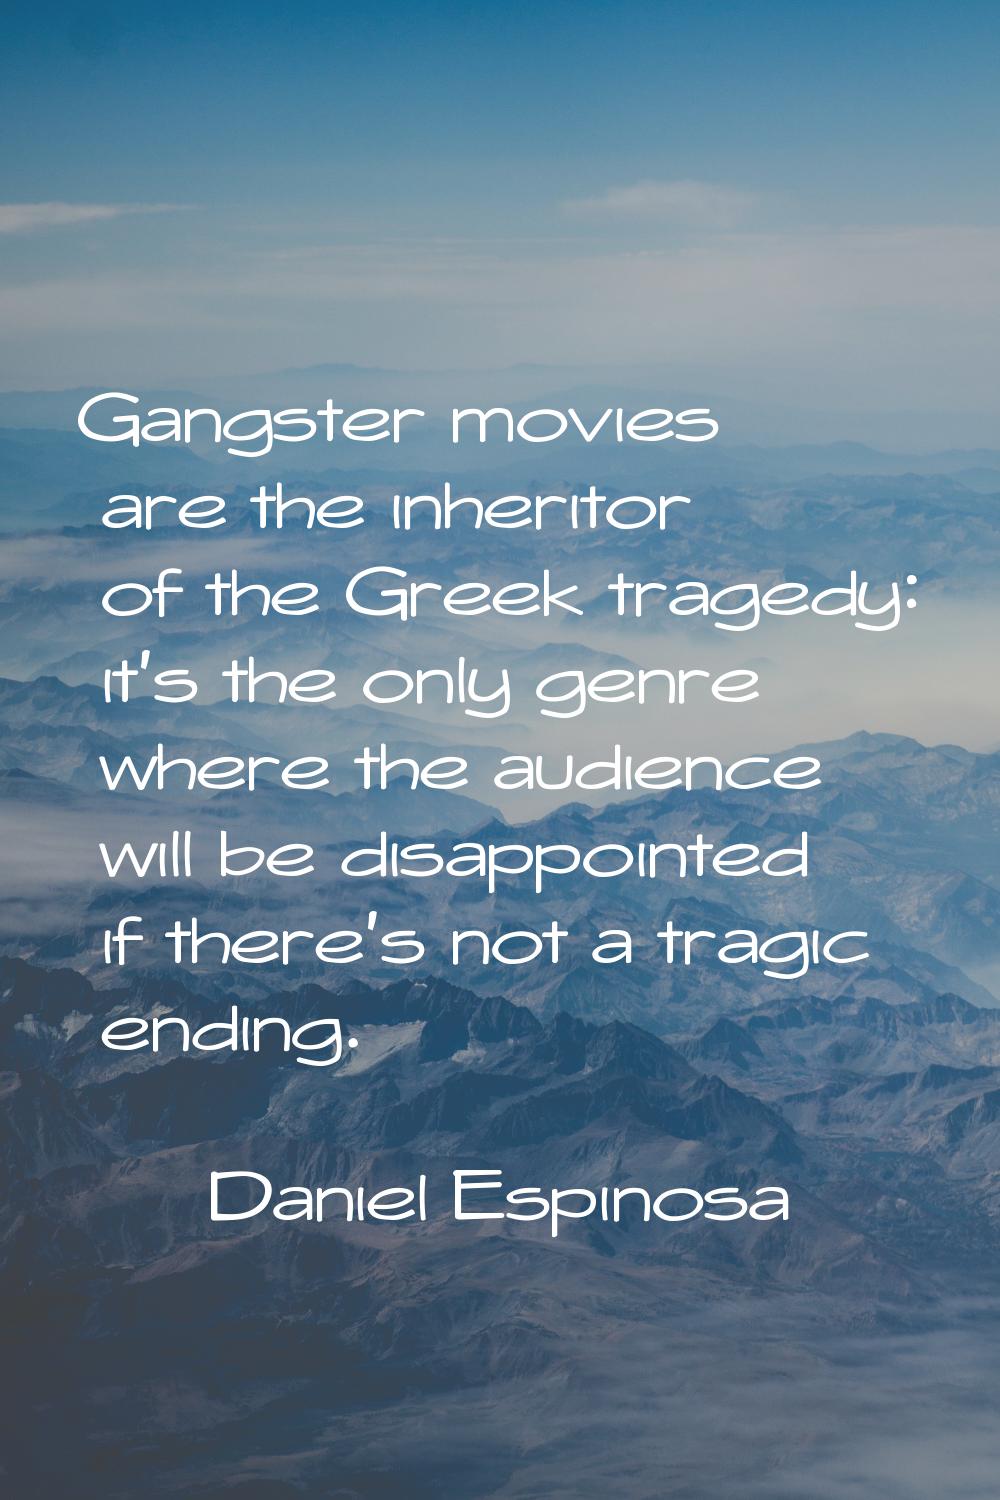 Gangster movies are the inheritor of the Greek tragedy: it's the only genre where the audience will